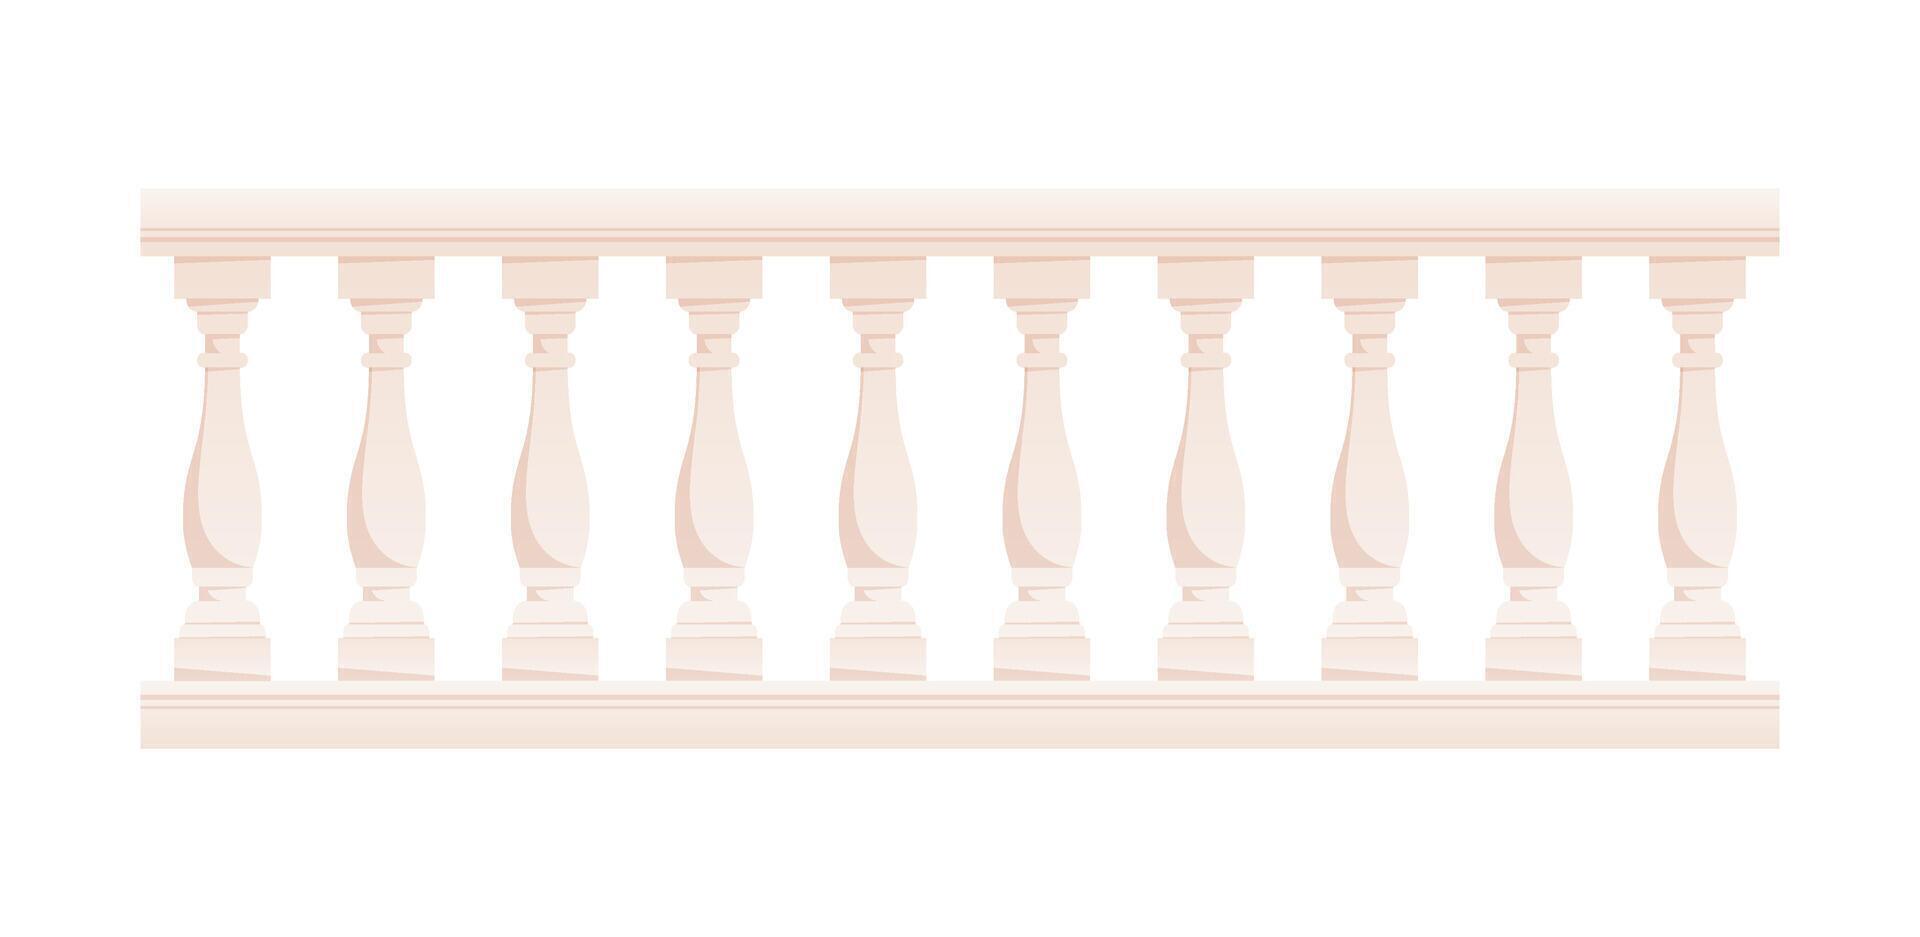 Stone balustrade with balusters for fencing vector